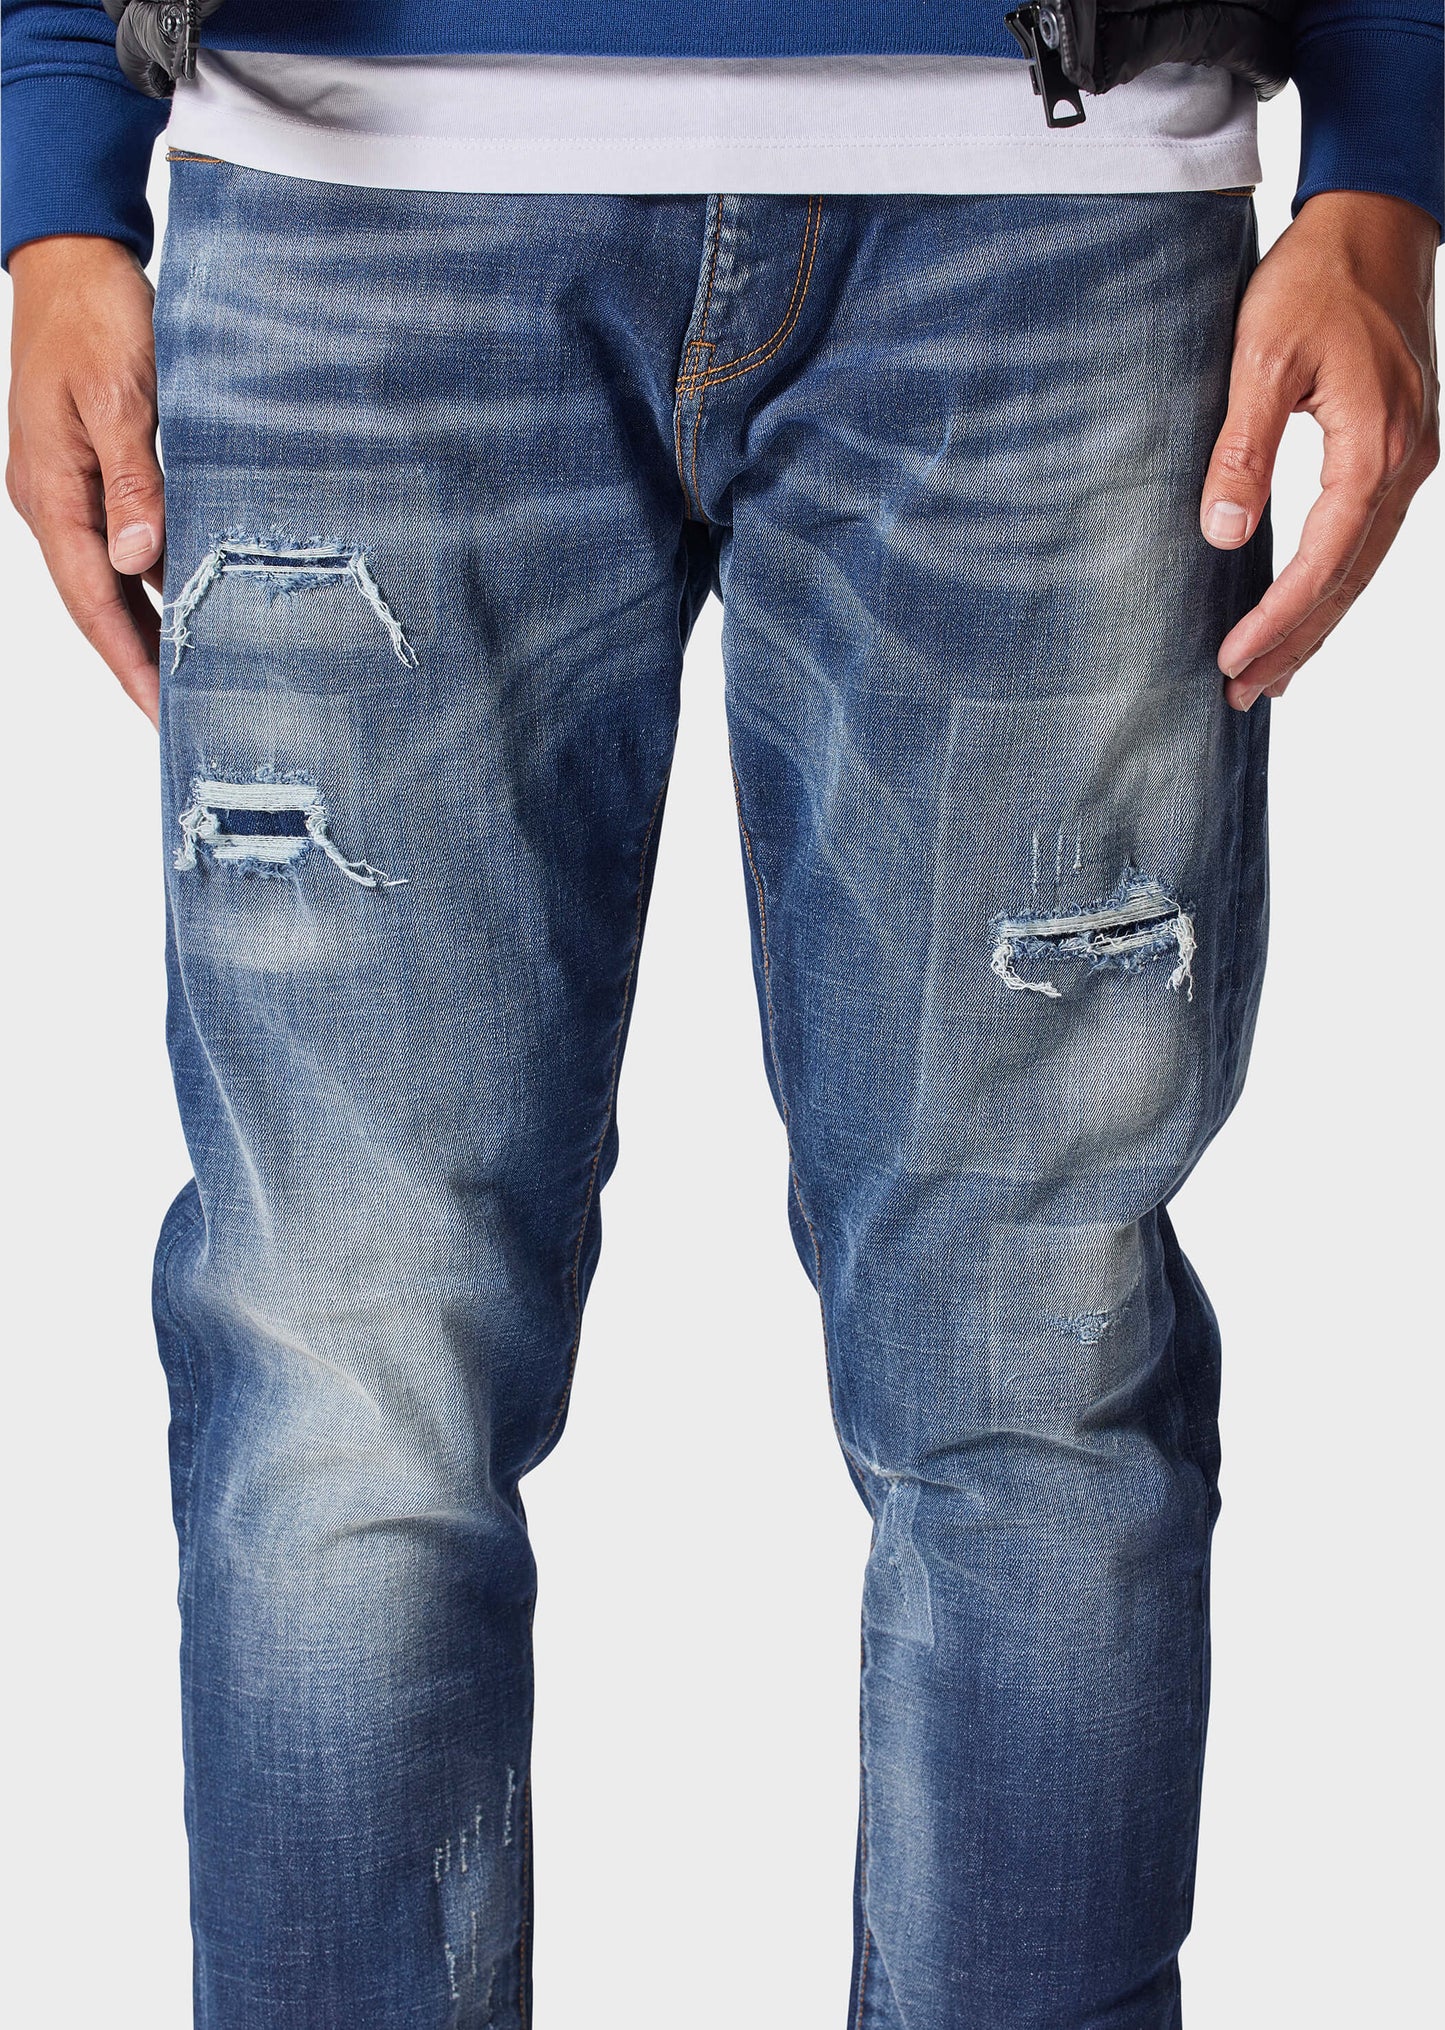 Moriarty COB 866 Slim Fit Jeans